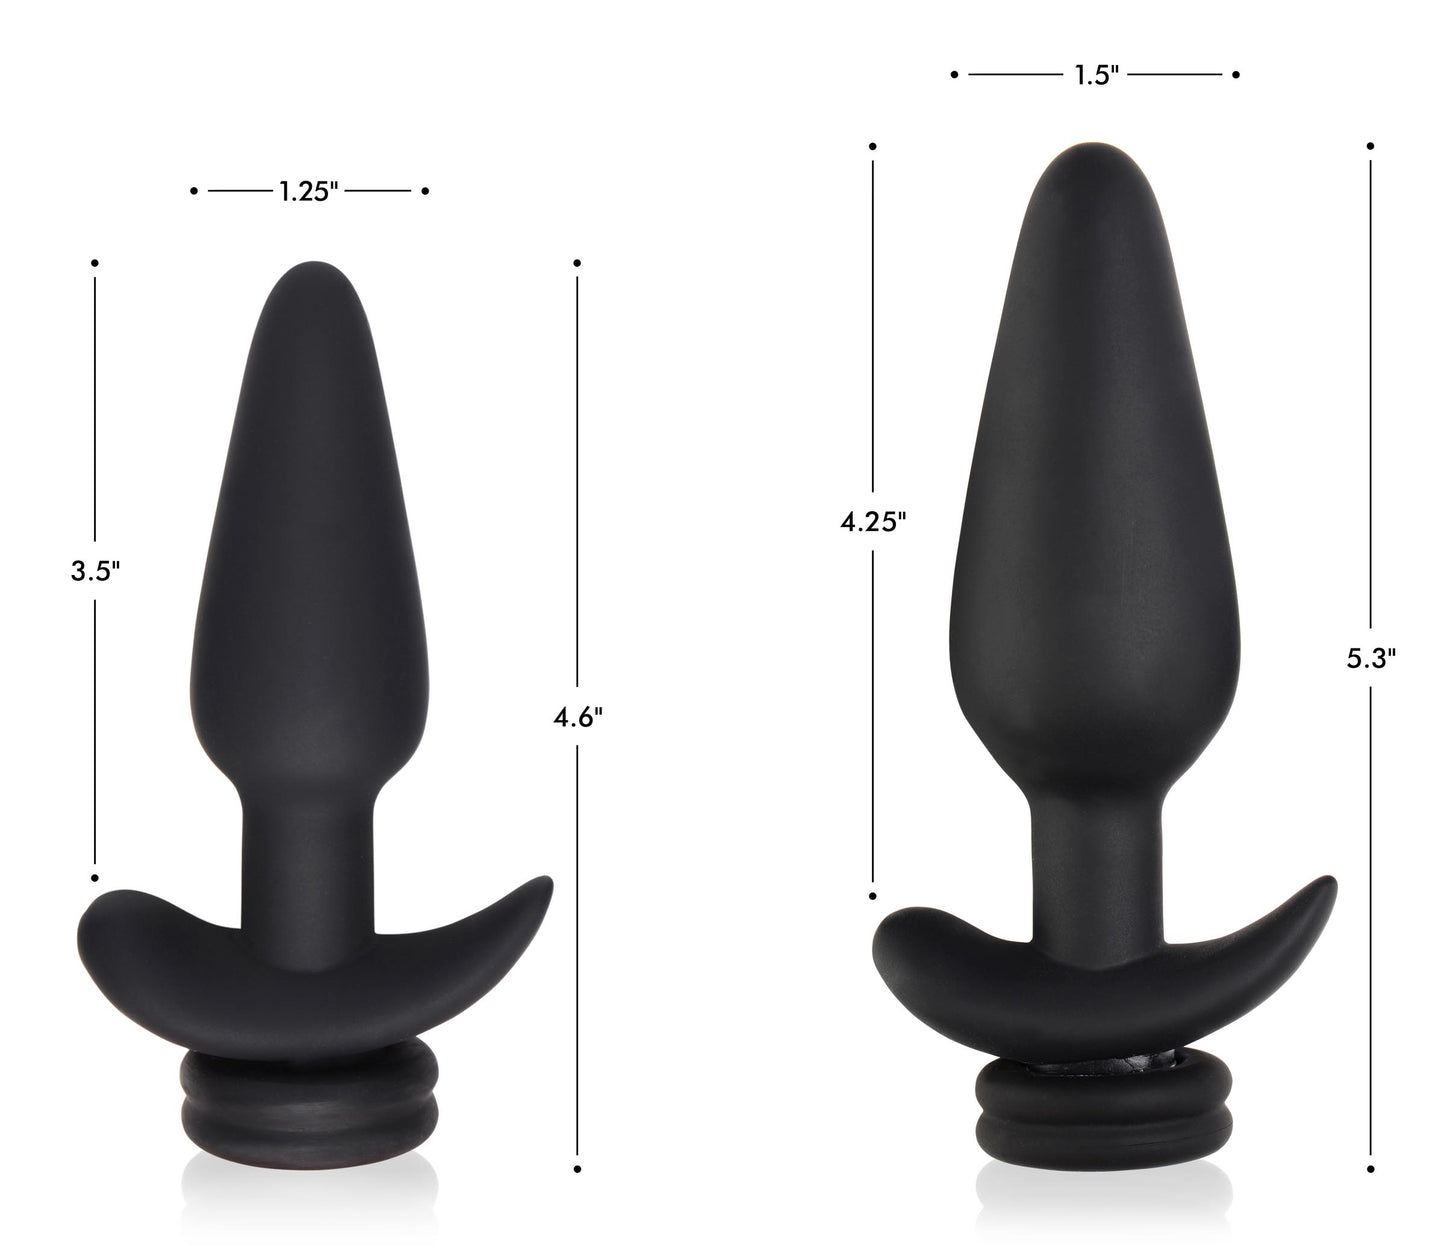 Small Vibrating Anal Plug With Interchangeable Fox Tail - White